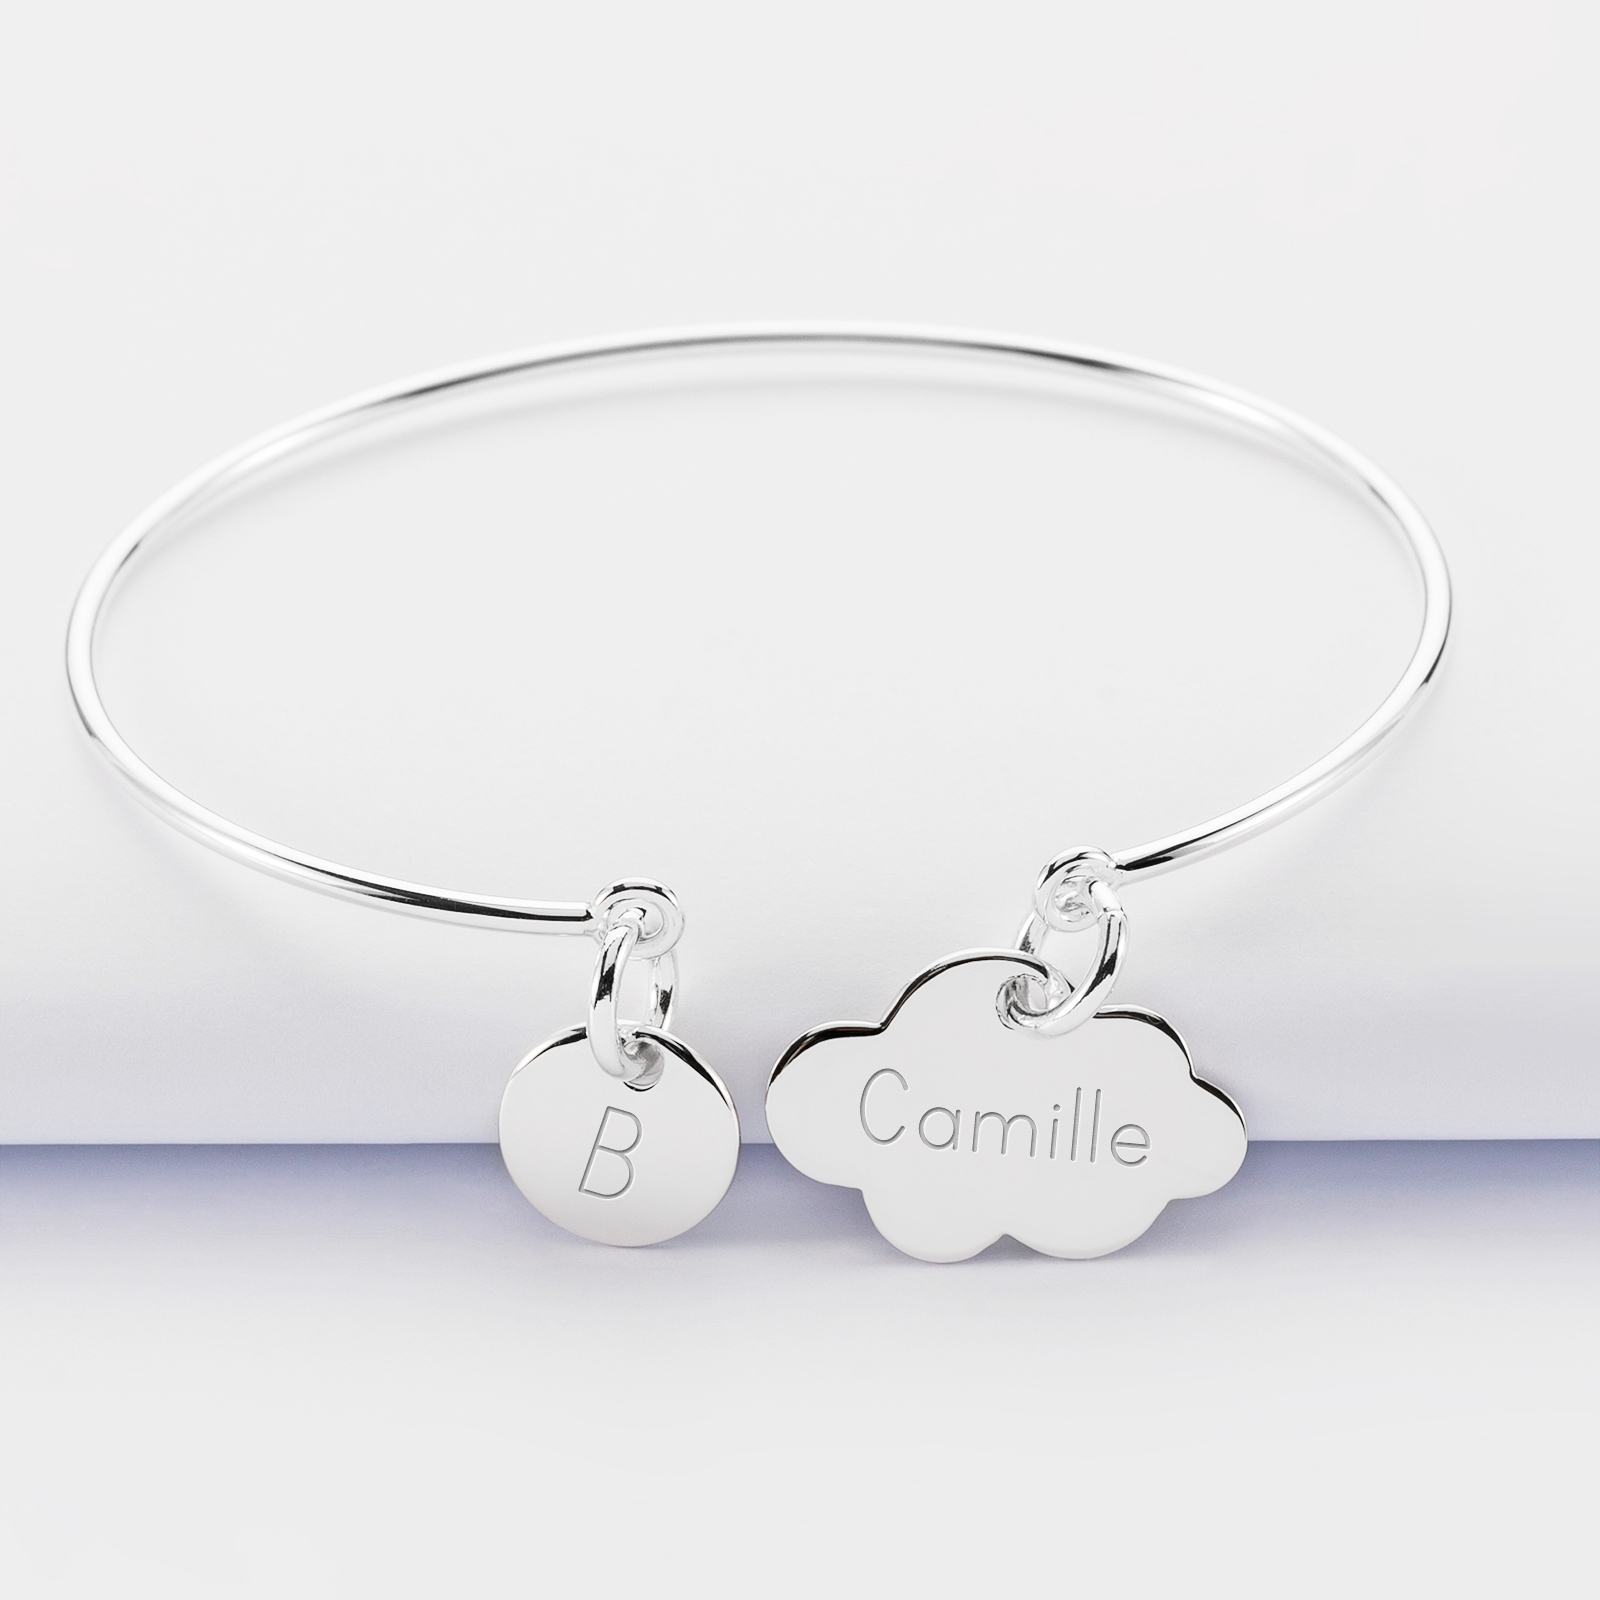 Personalised engraved silver cloud 20x14mm bangle and round 10mm charm - name 1